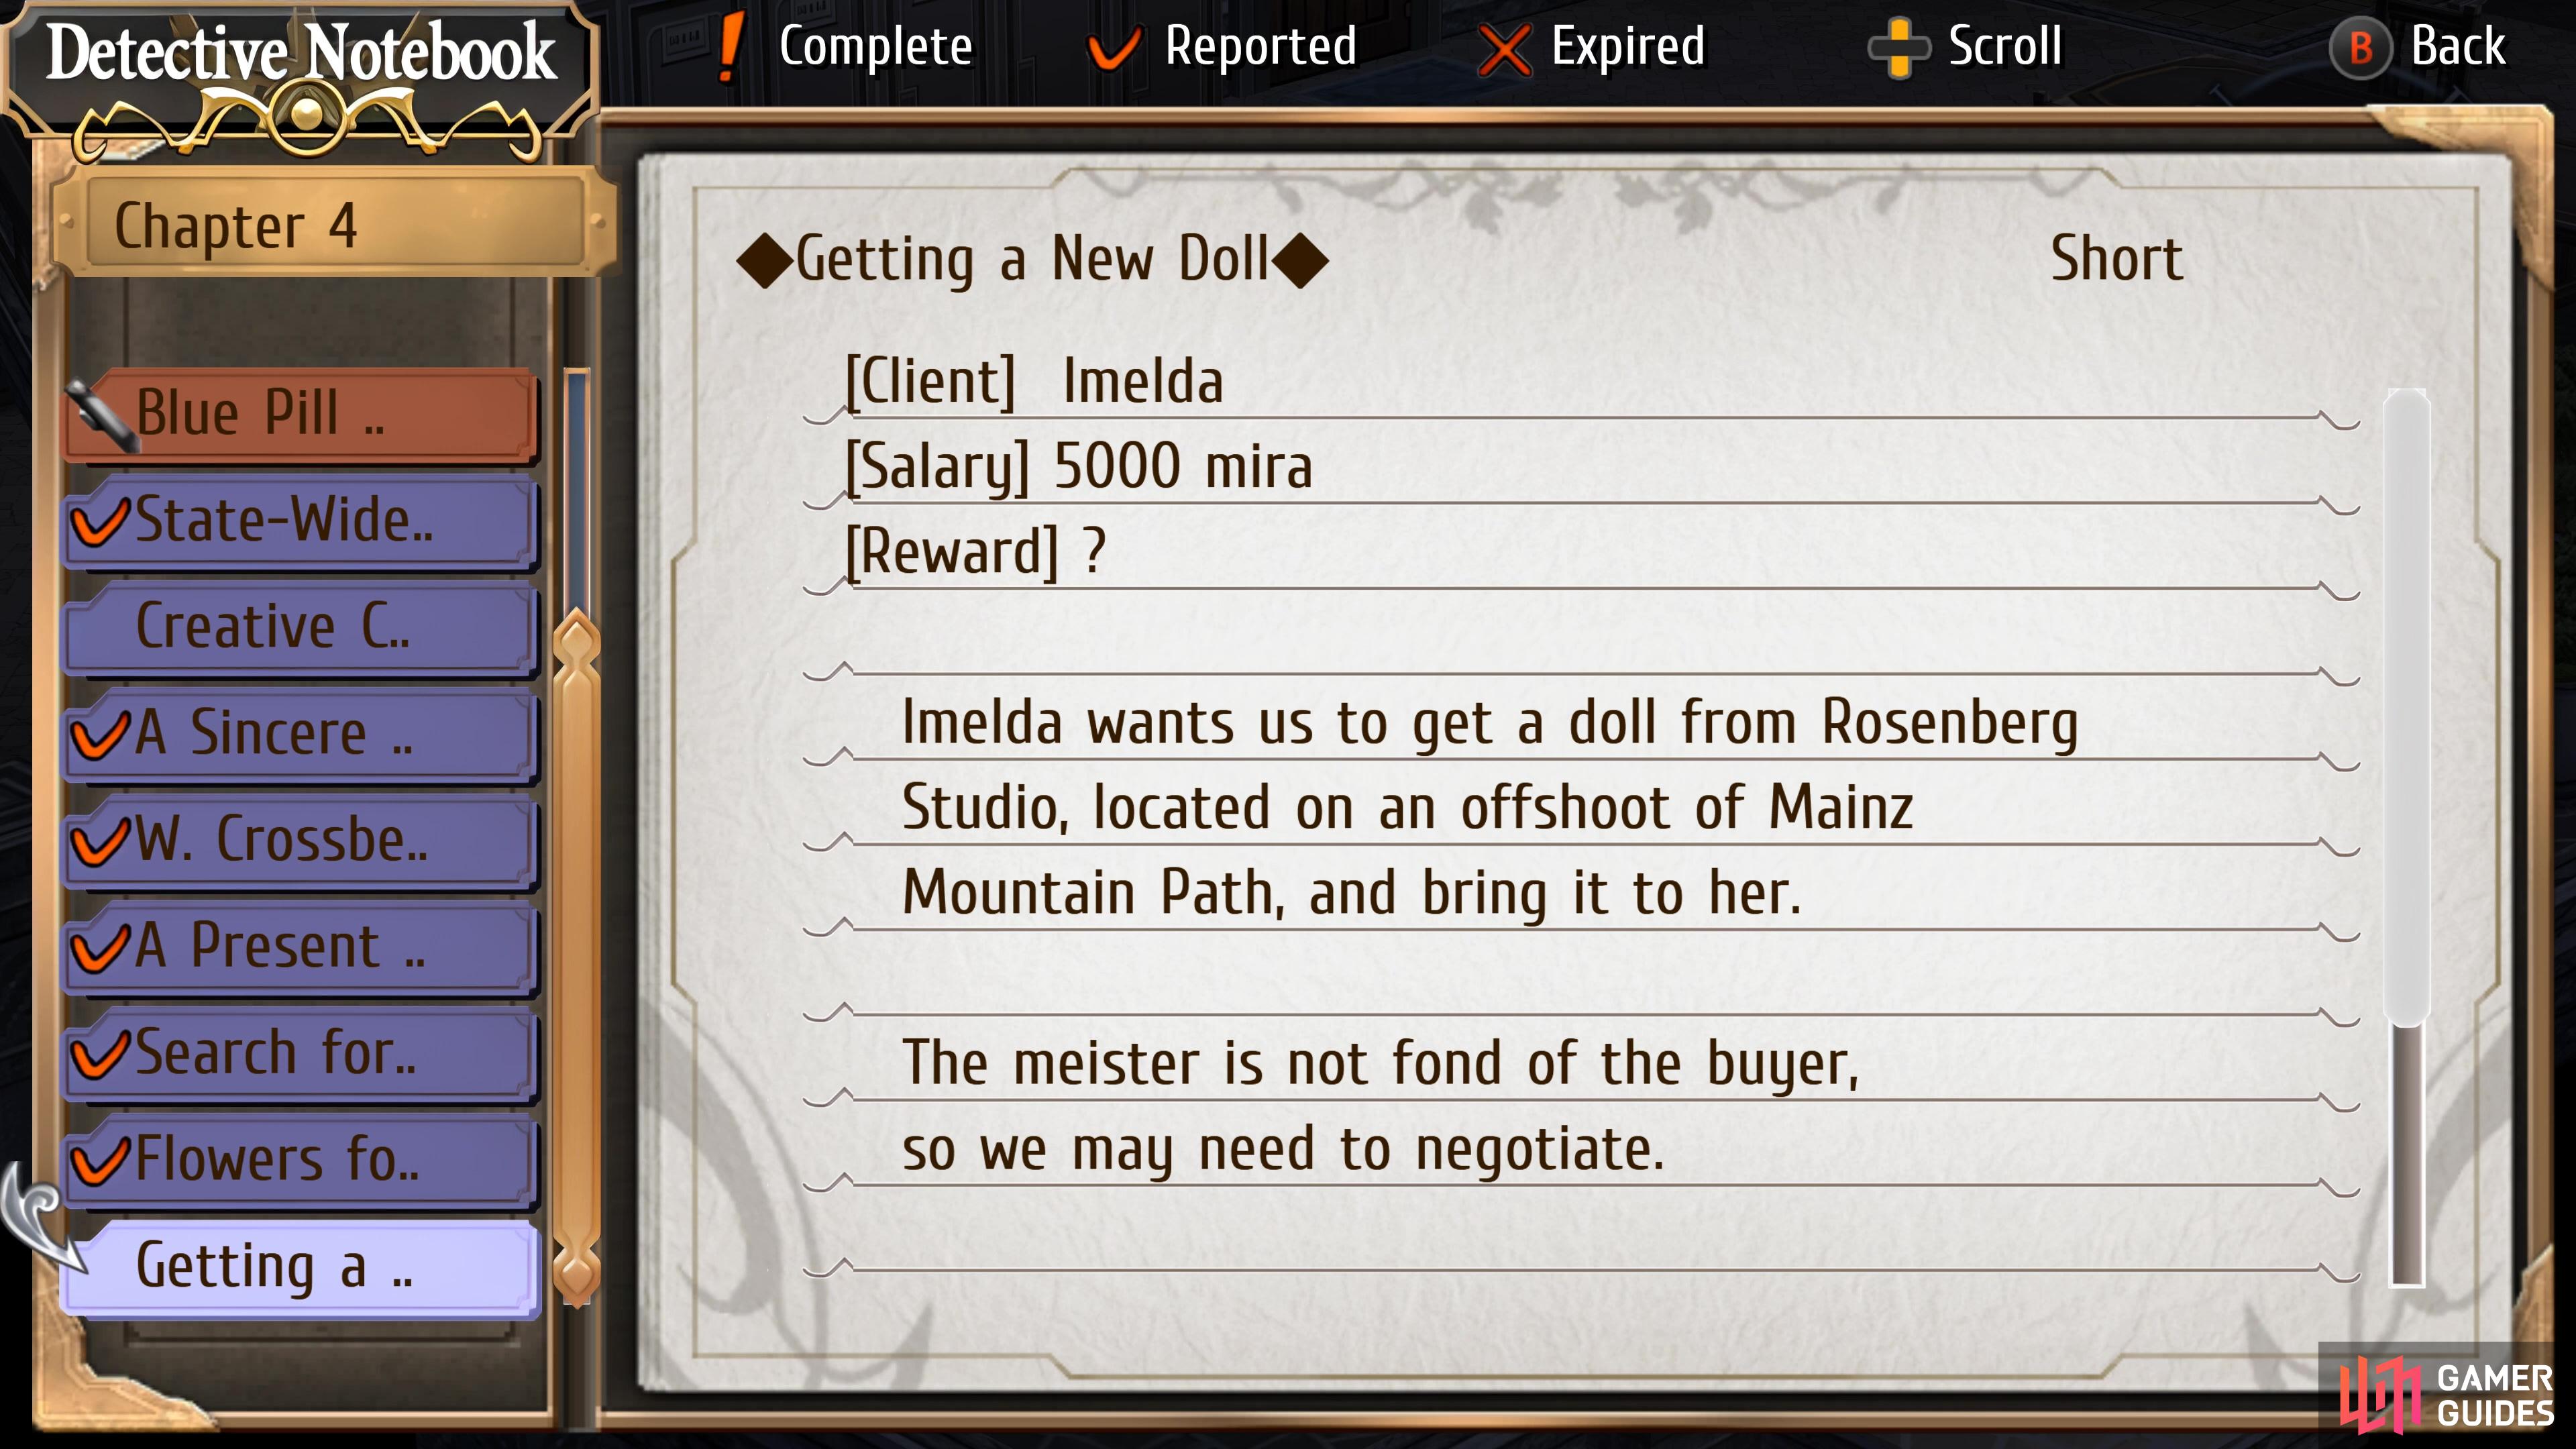 Getting a New Doll is a hidden request on Chapter 4 Day 2.